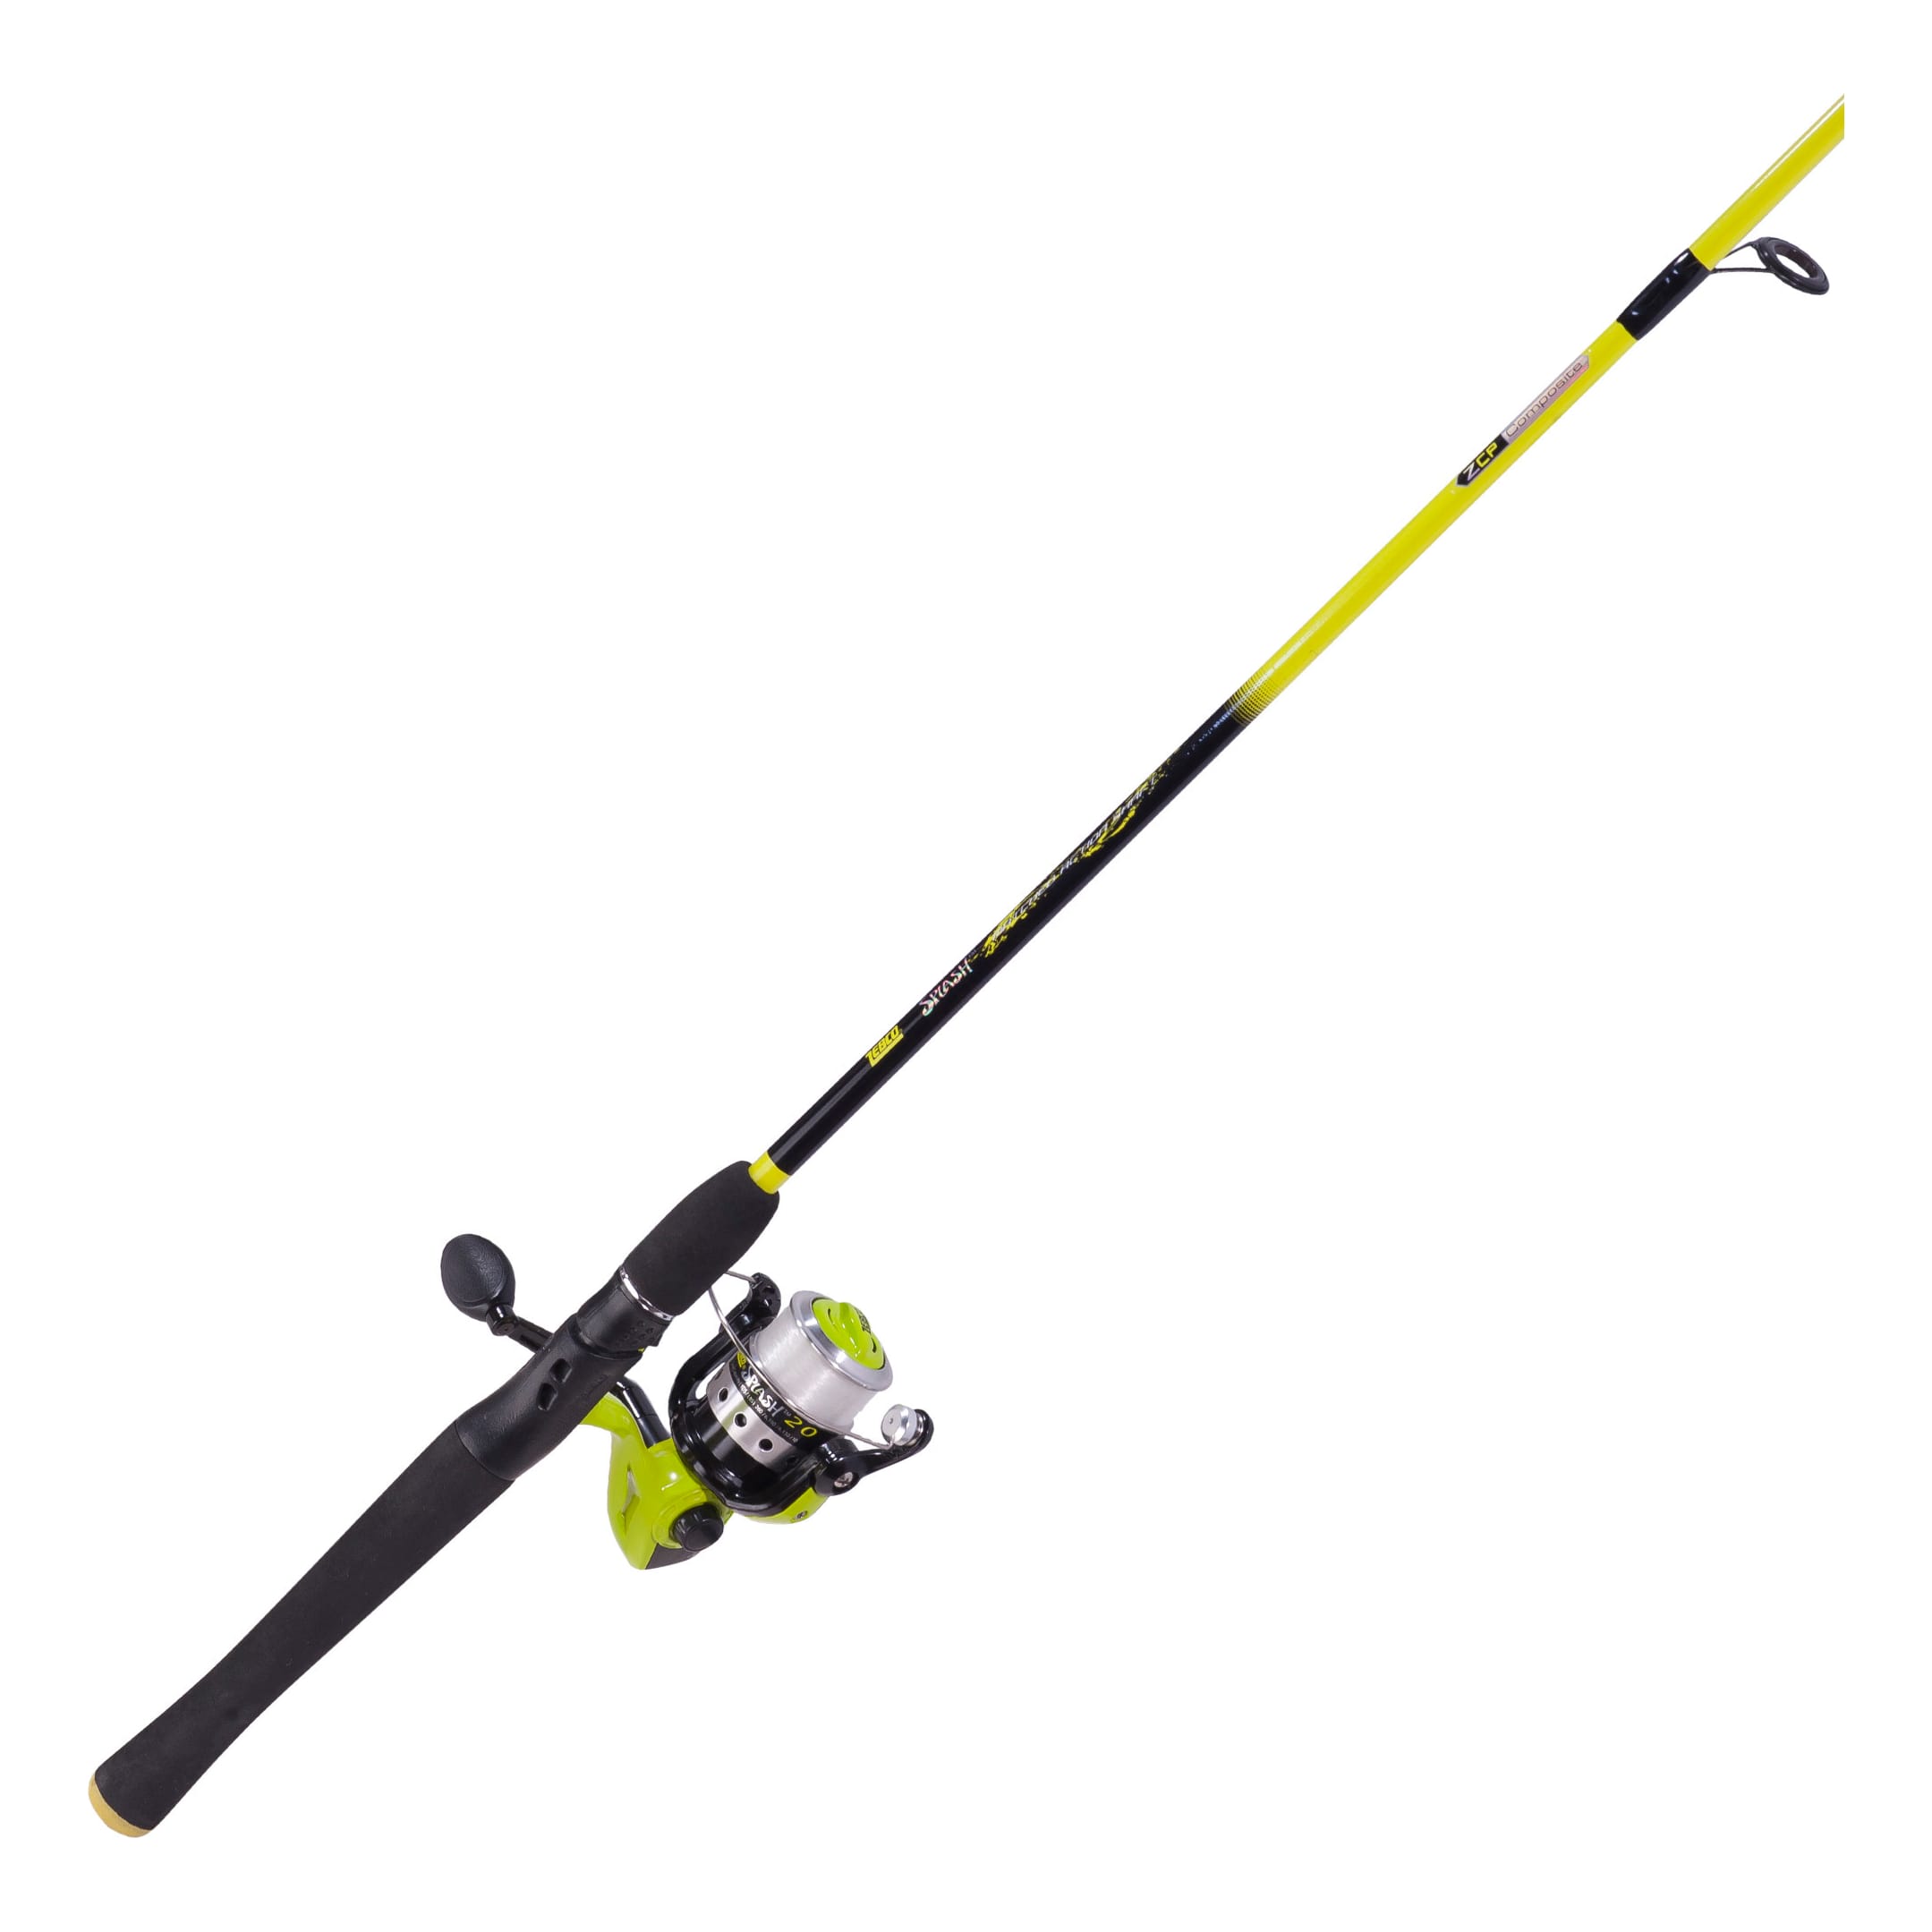 Bass Pro Shops King Kat Rod and Reel Spinning Combo - Cabelas - BASS